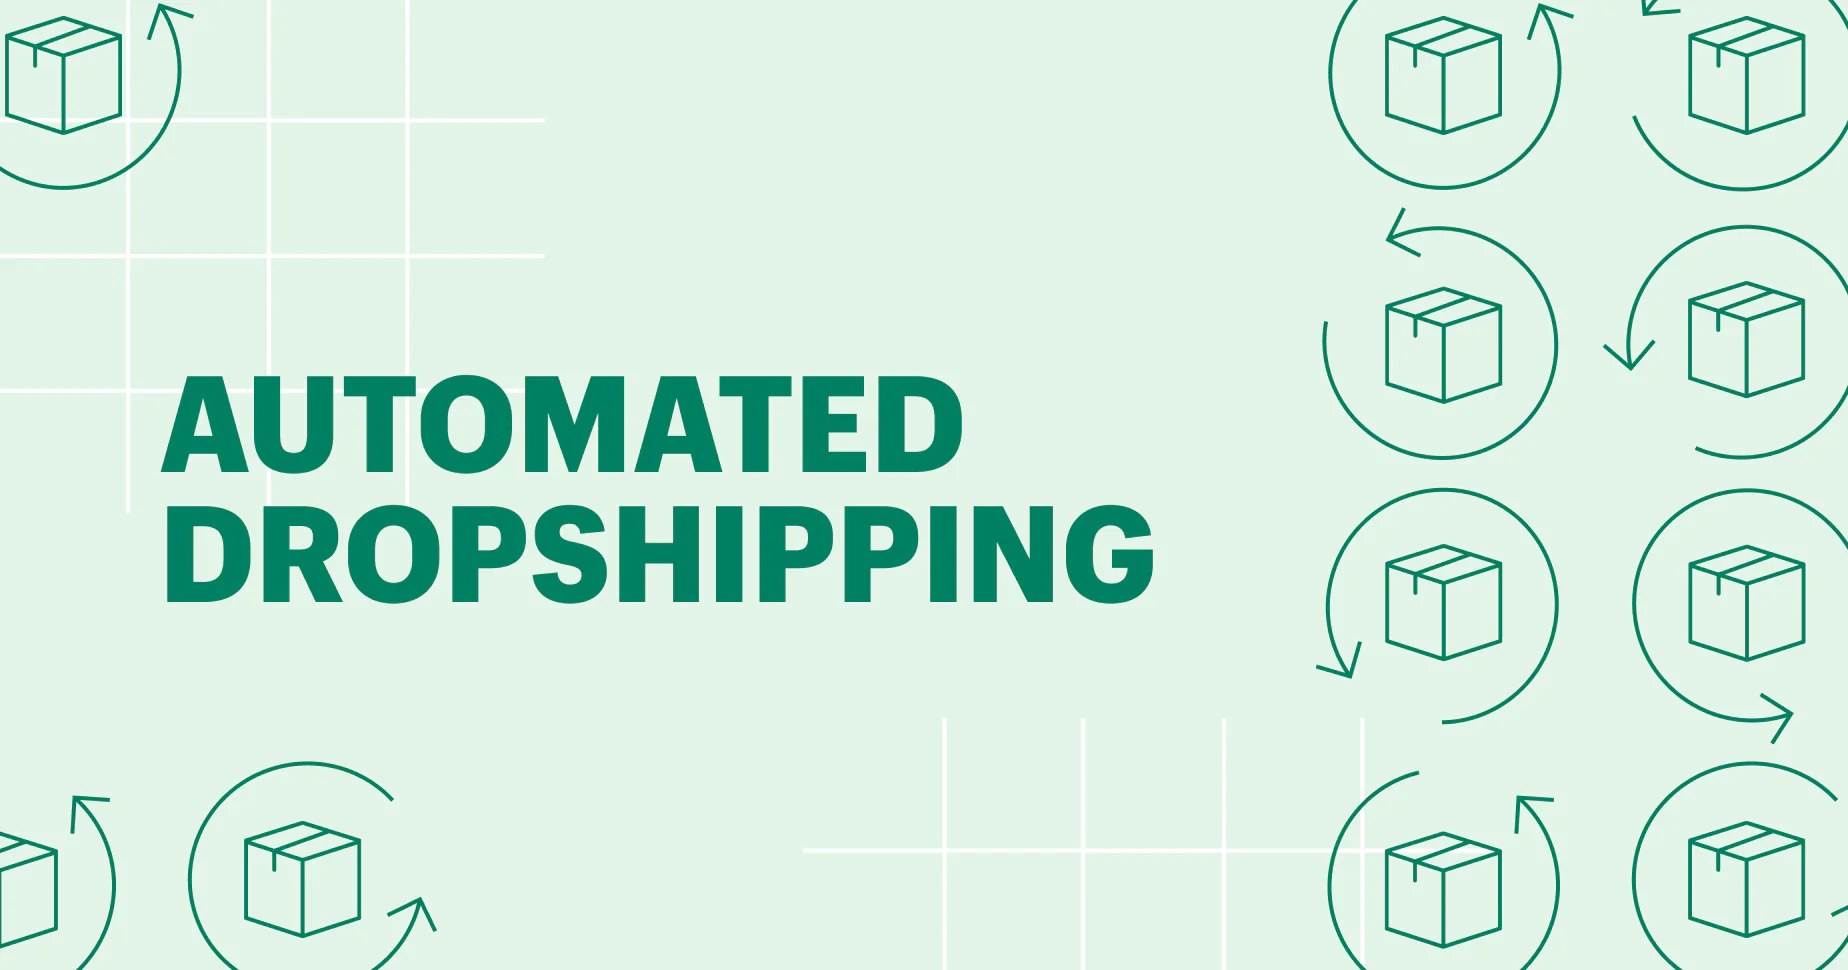 Automated Dropshipping poster